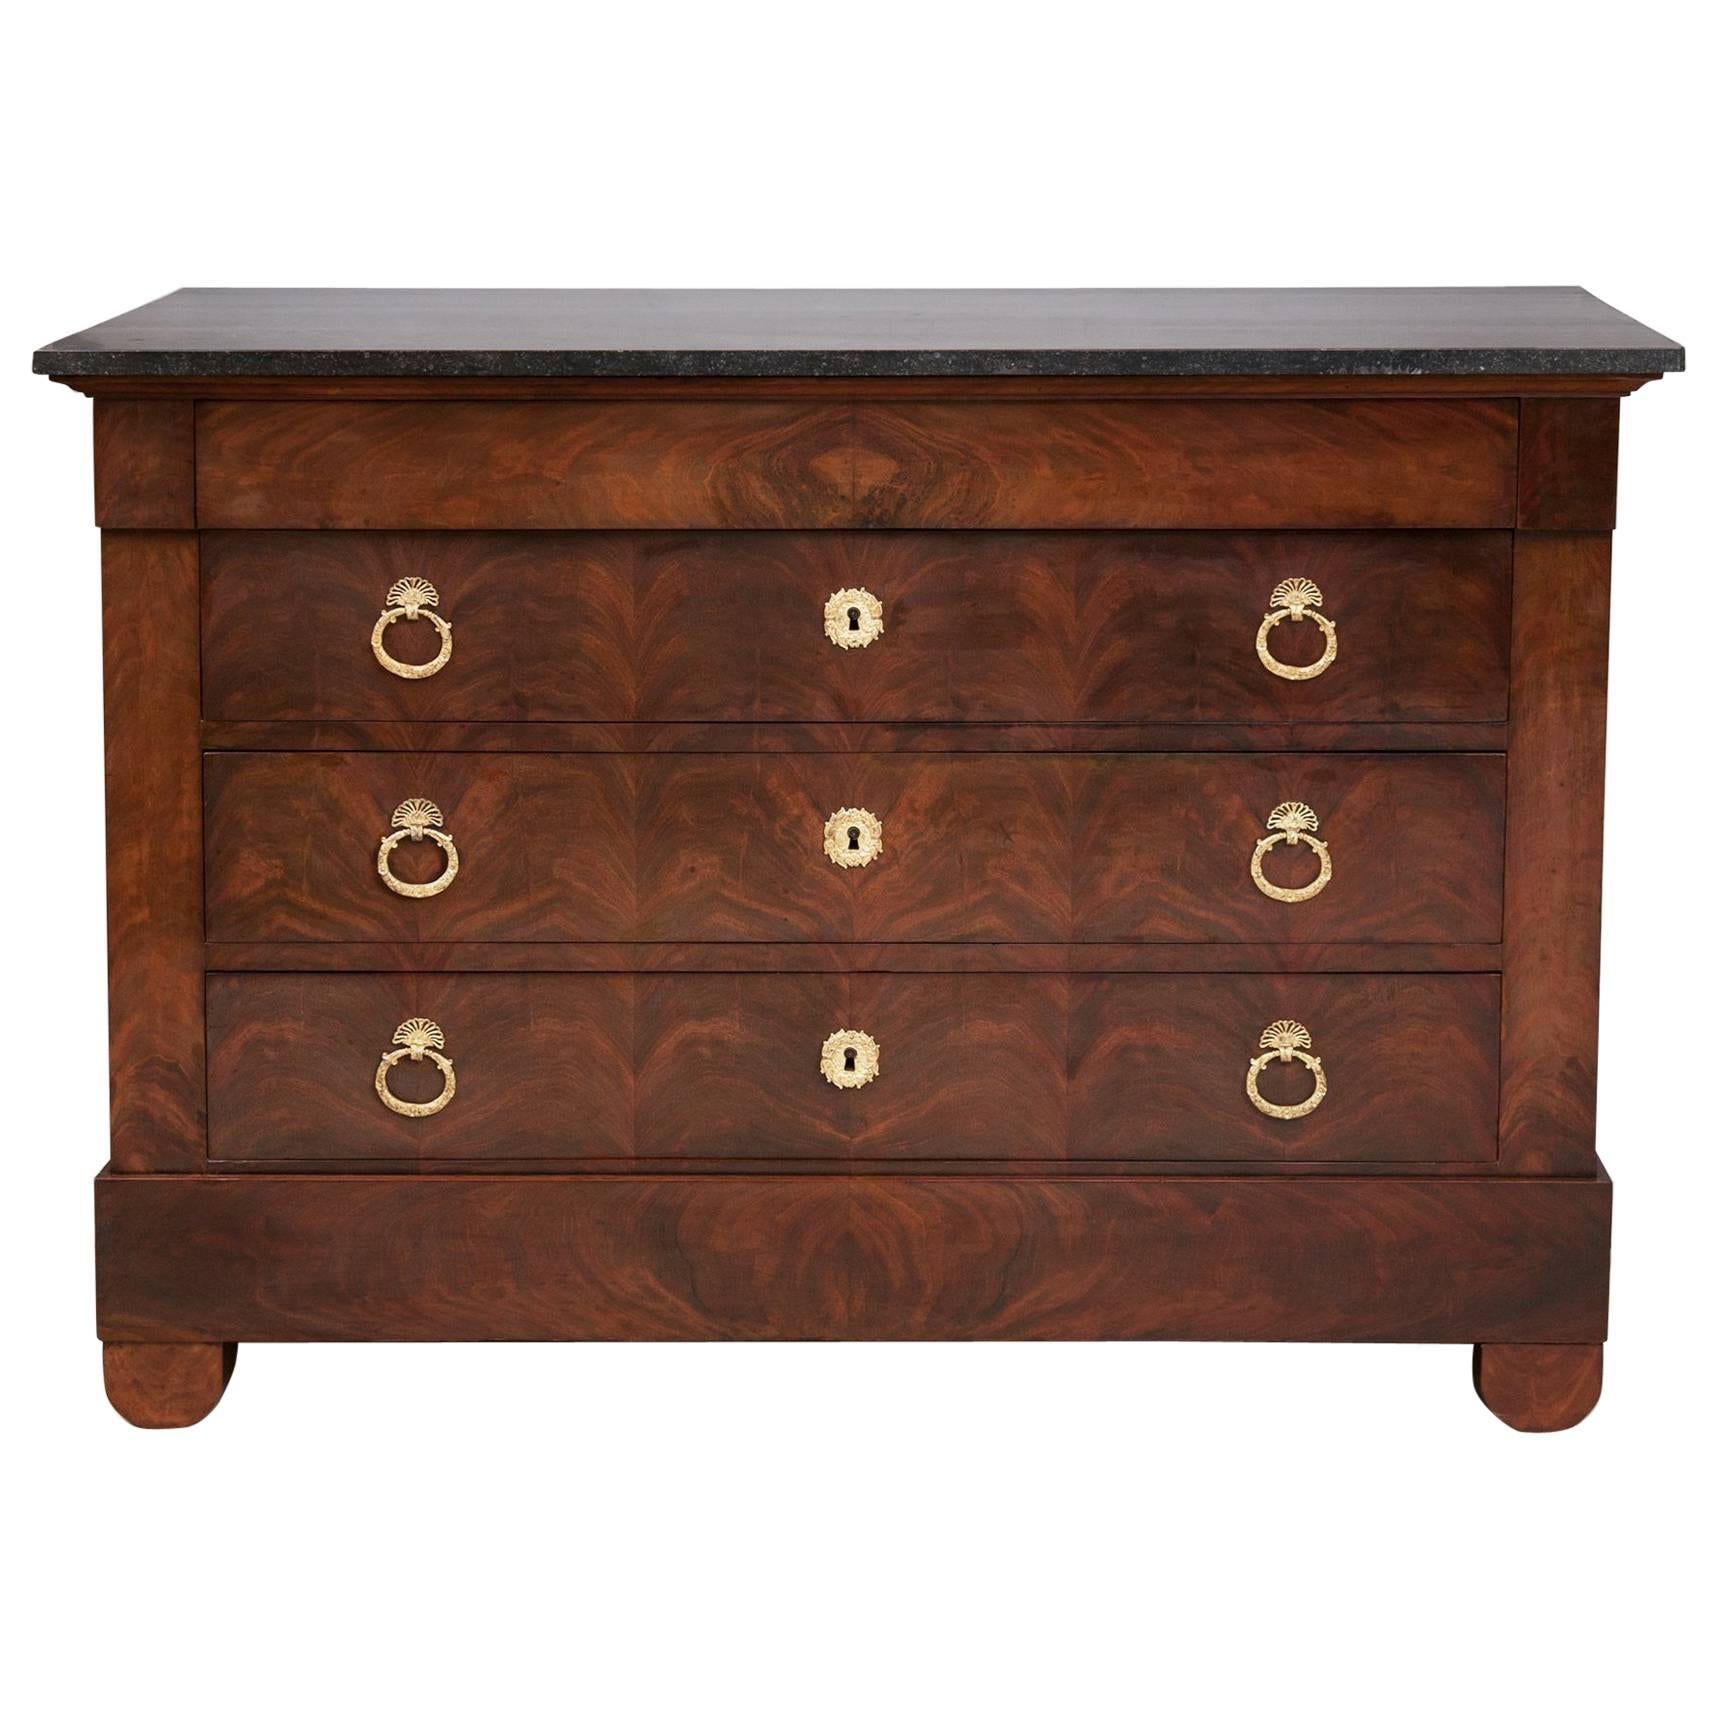 Early 19th Century Restauration Period Flame Mahogany Commode with Ormolu Handle For Sale